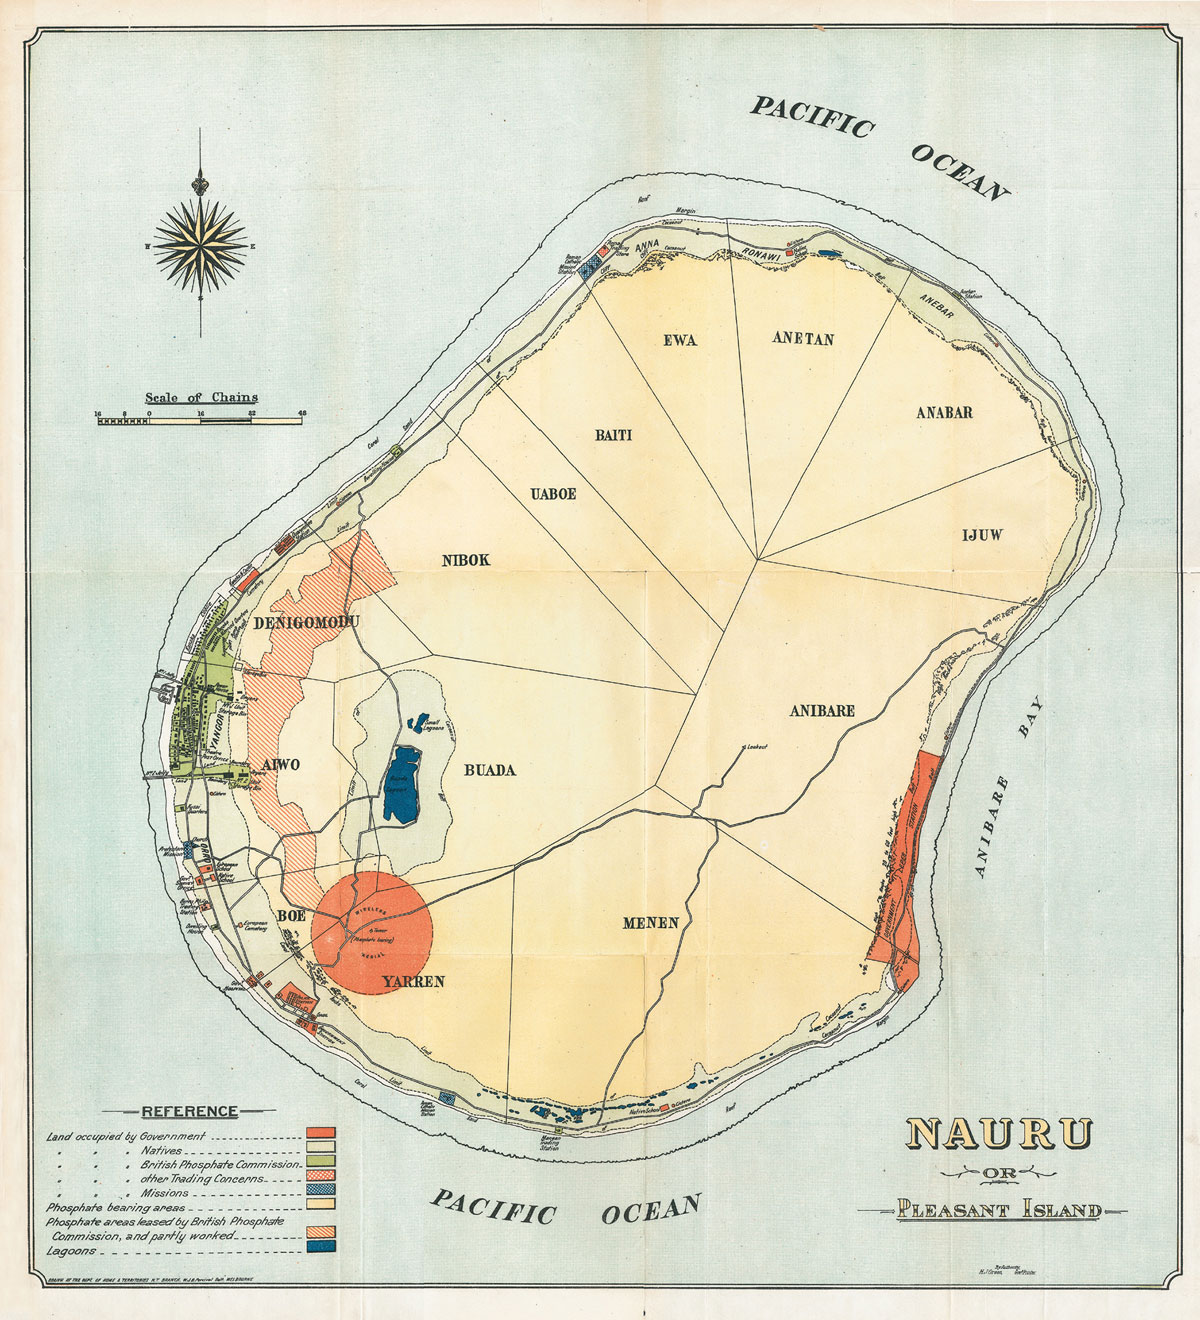 A map of Nauru from Australia’s 1924 report to the League of Nations
on the administration of the colony.